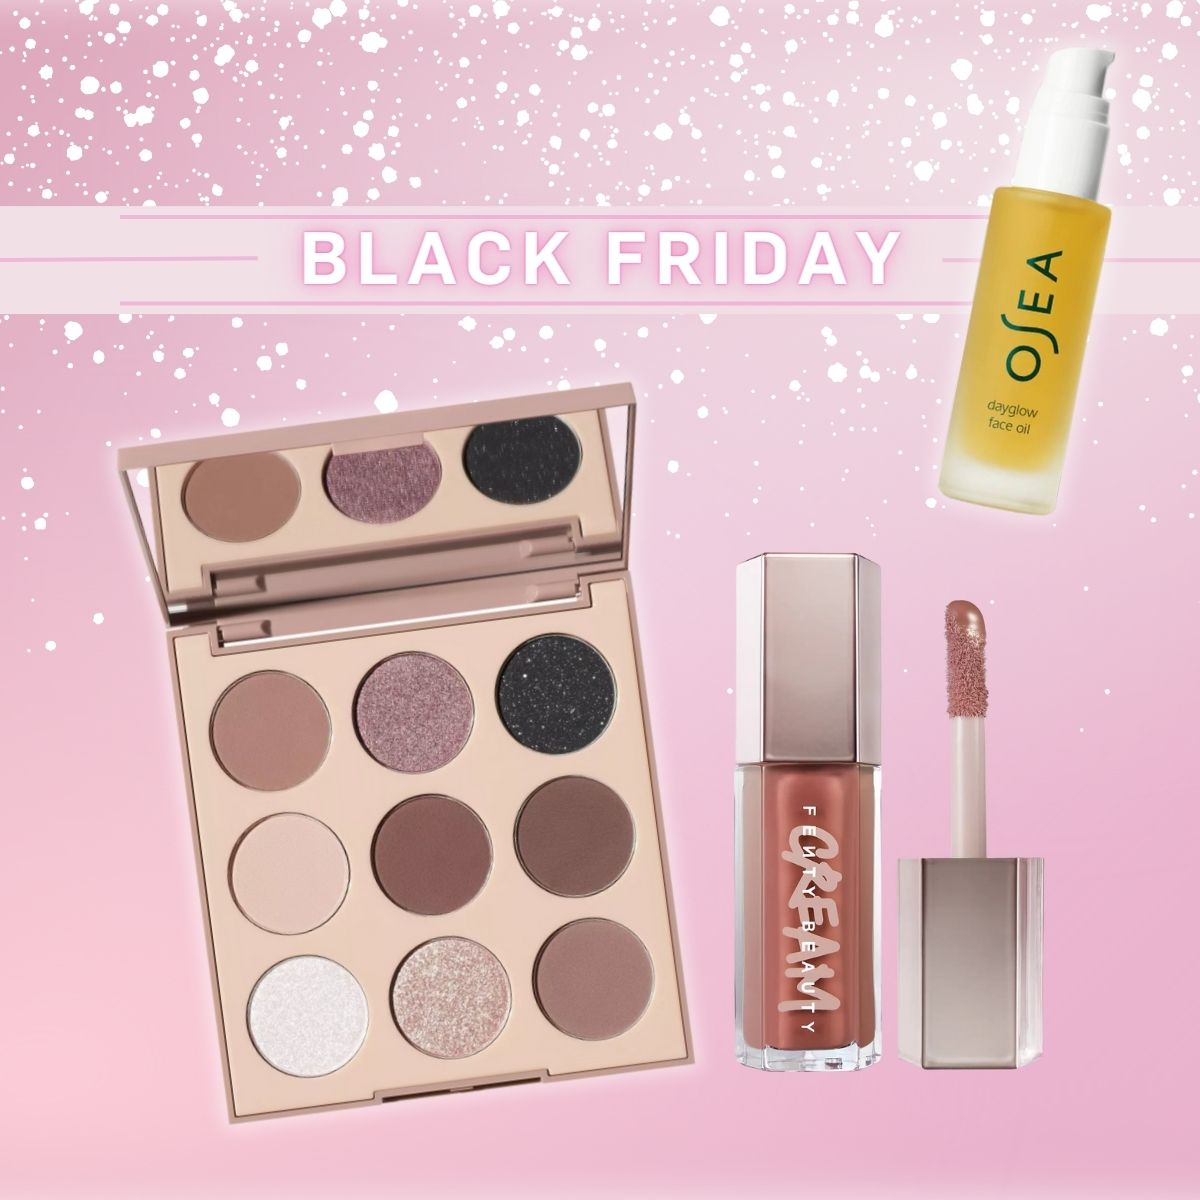 Makeup & Beauty Black Friday & Cyber Monday Deals, Coupons, Sales